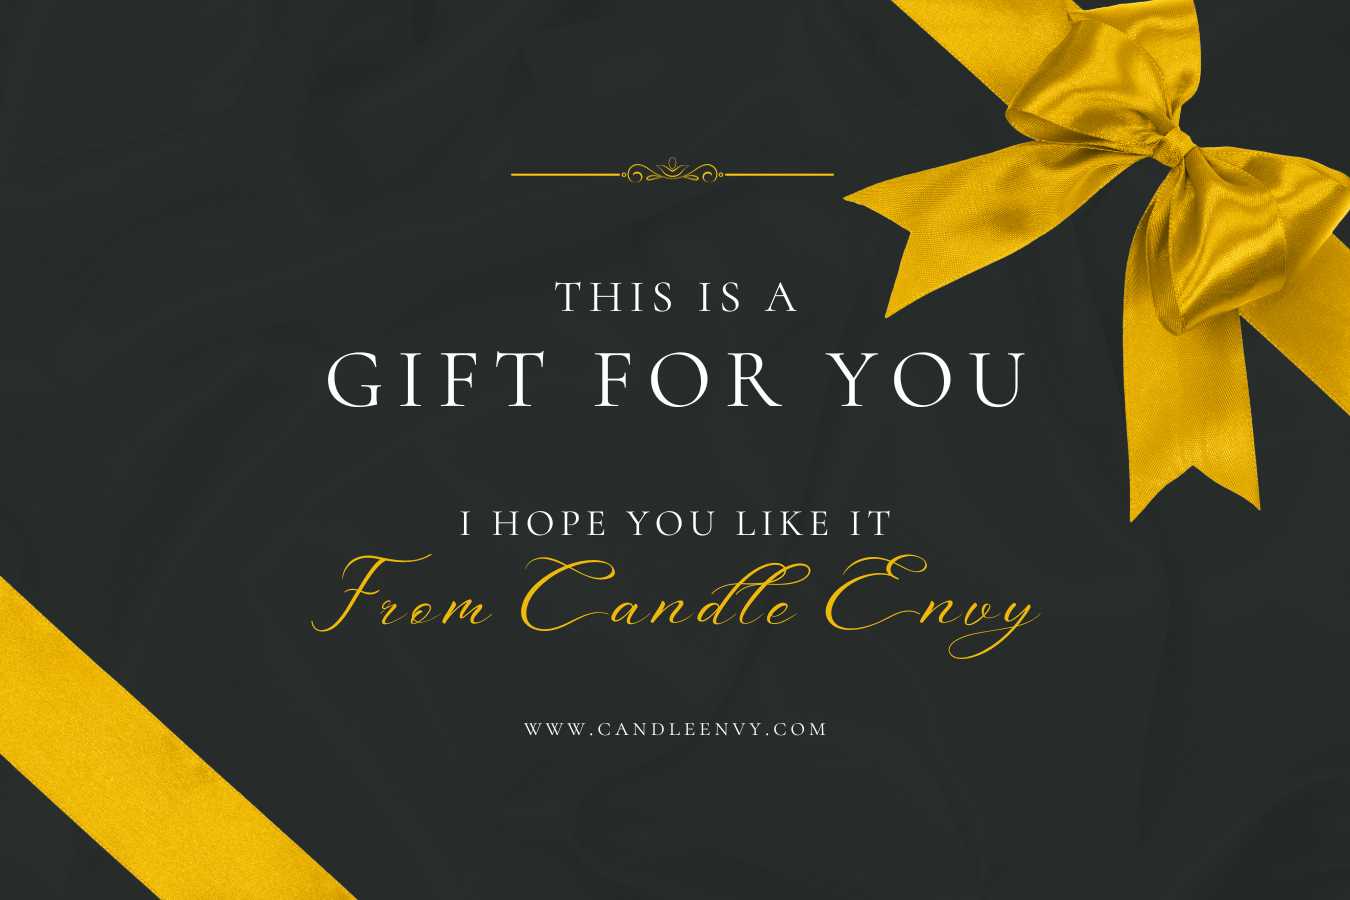 Candle Envy Gift Card